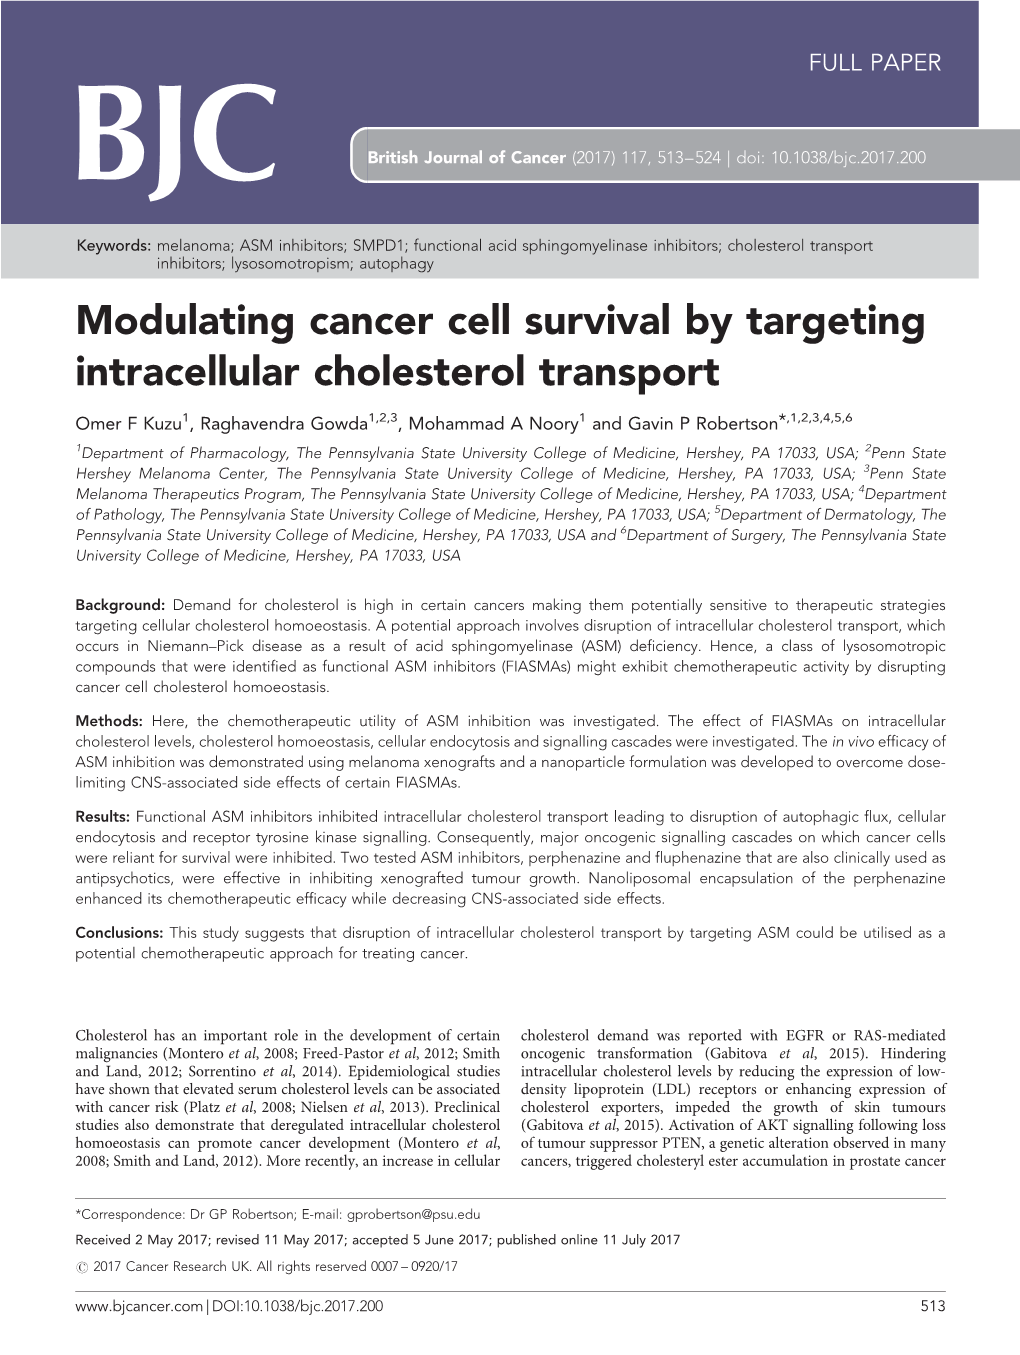 Modulating Cancer Cell Survival by Targeting Intracellular Cholesterol Transport